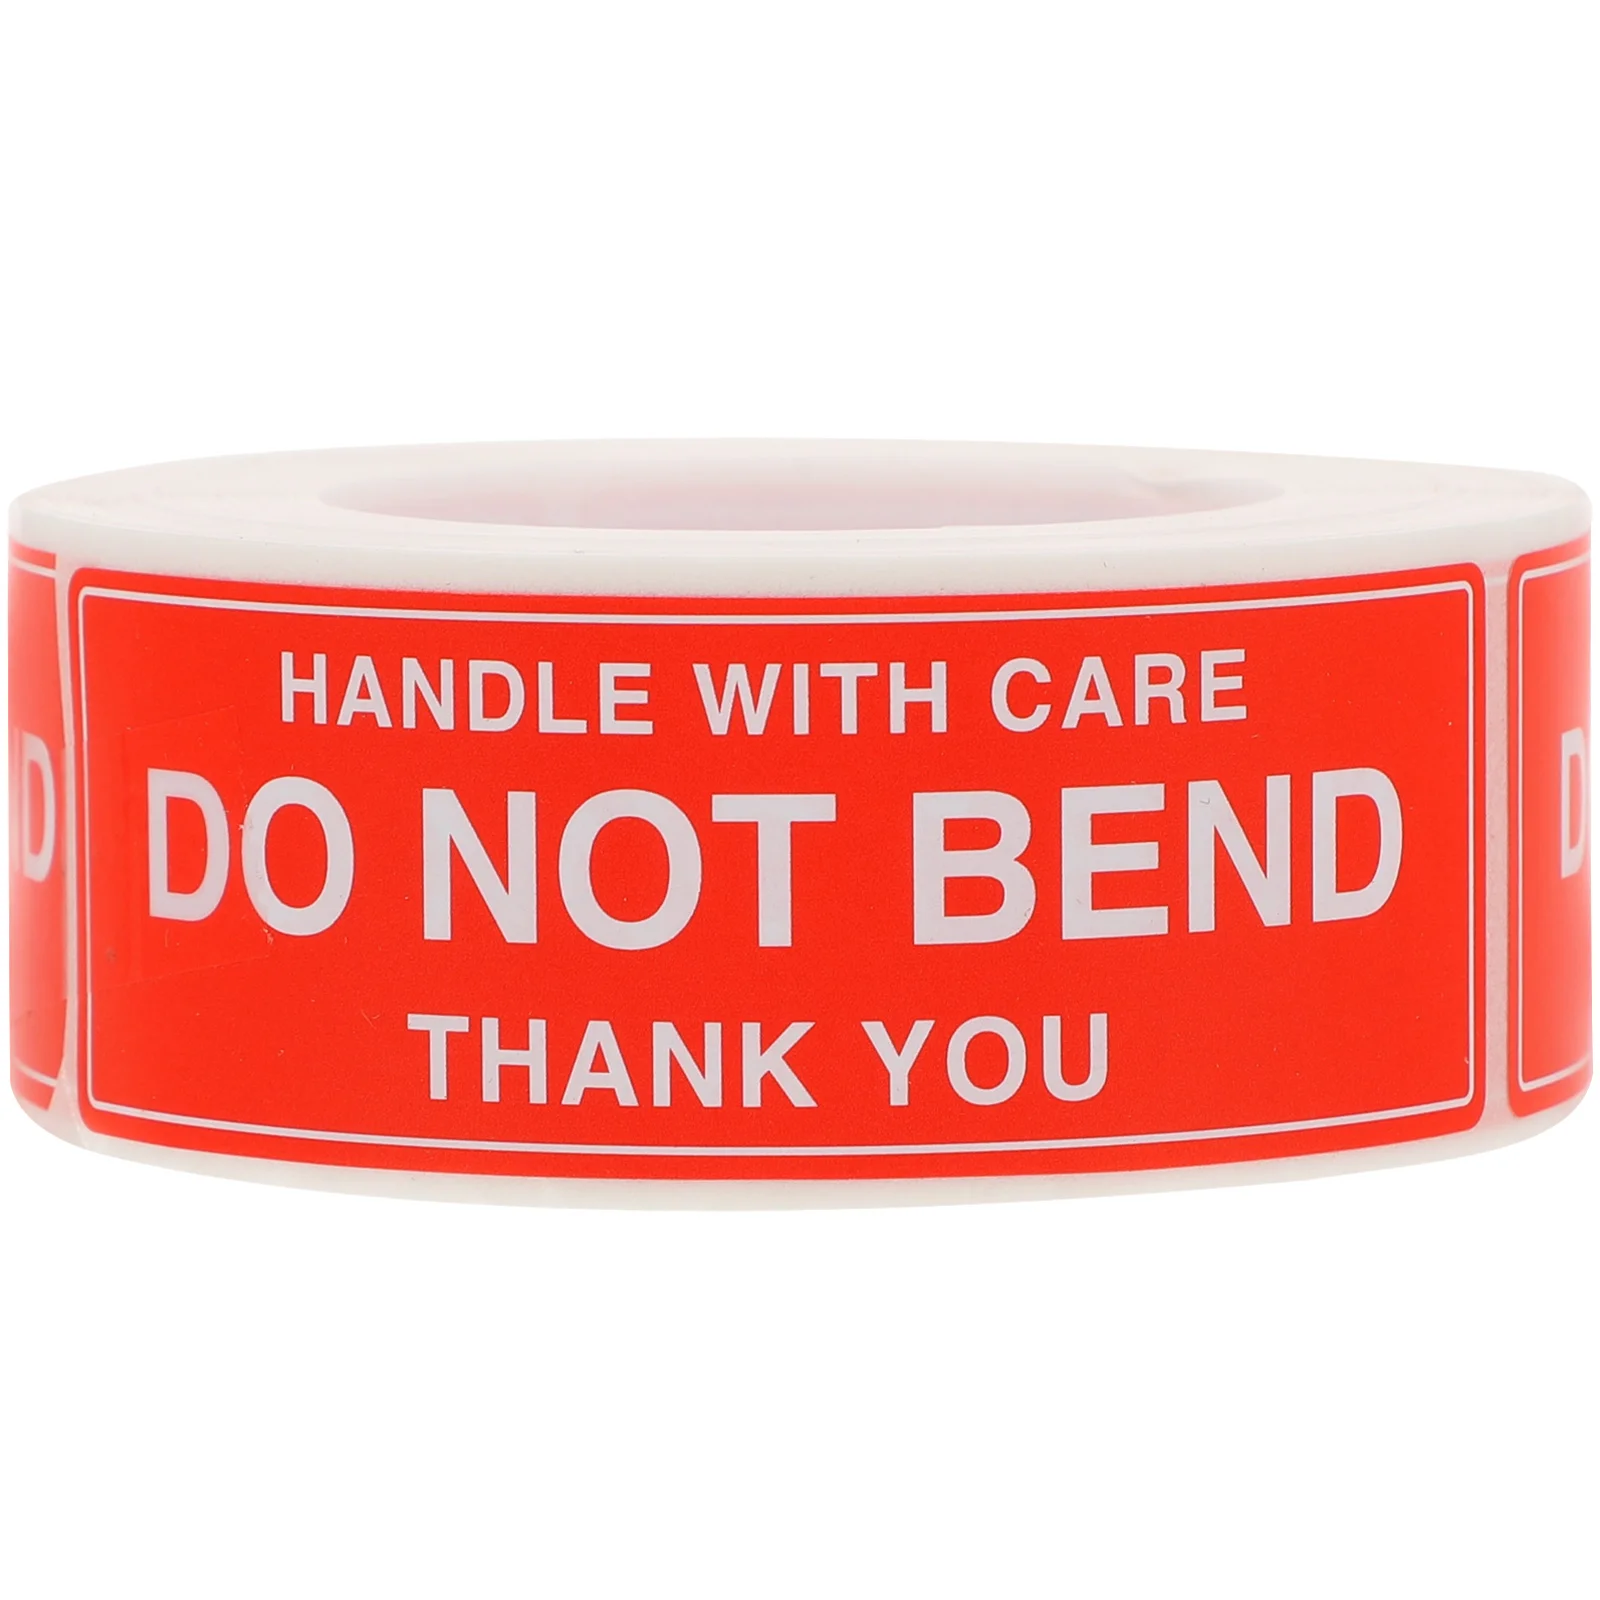 

Do Not Bend The Label Stickers Packing Warning Shipping Package Labels Self-adhesive Coated Paper Caution